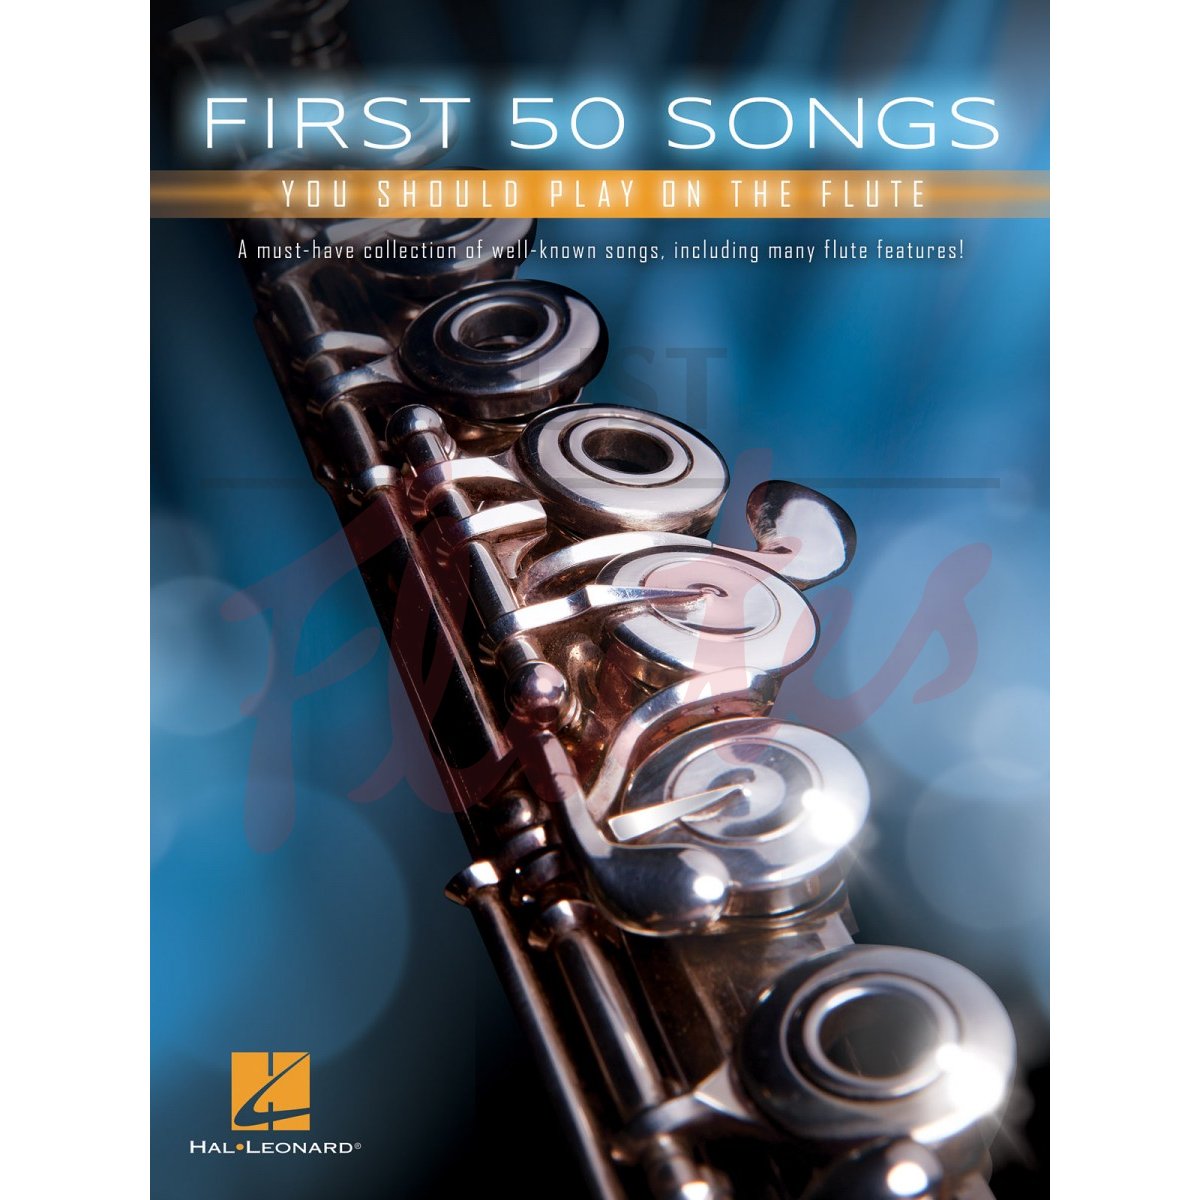 The First 50 Songs You Should Play on the Flute